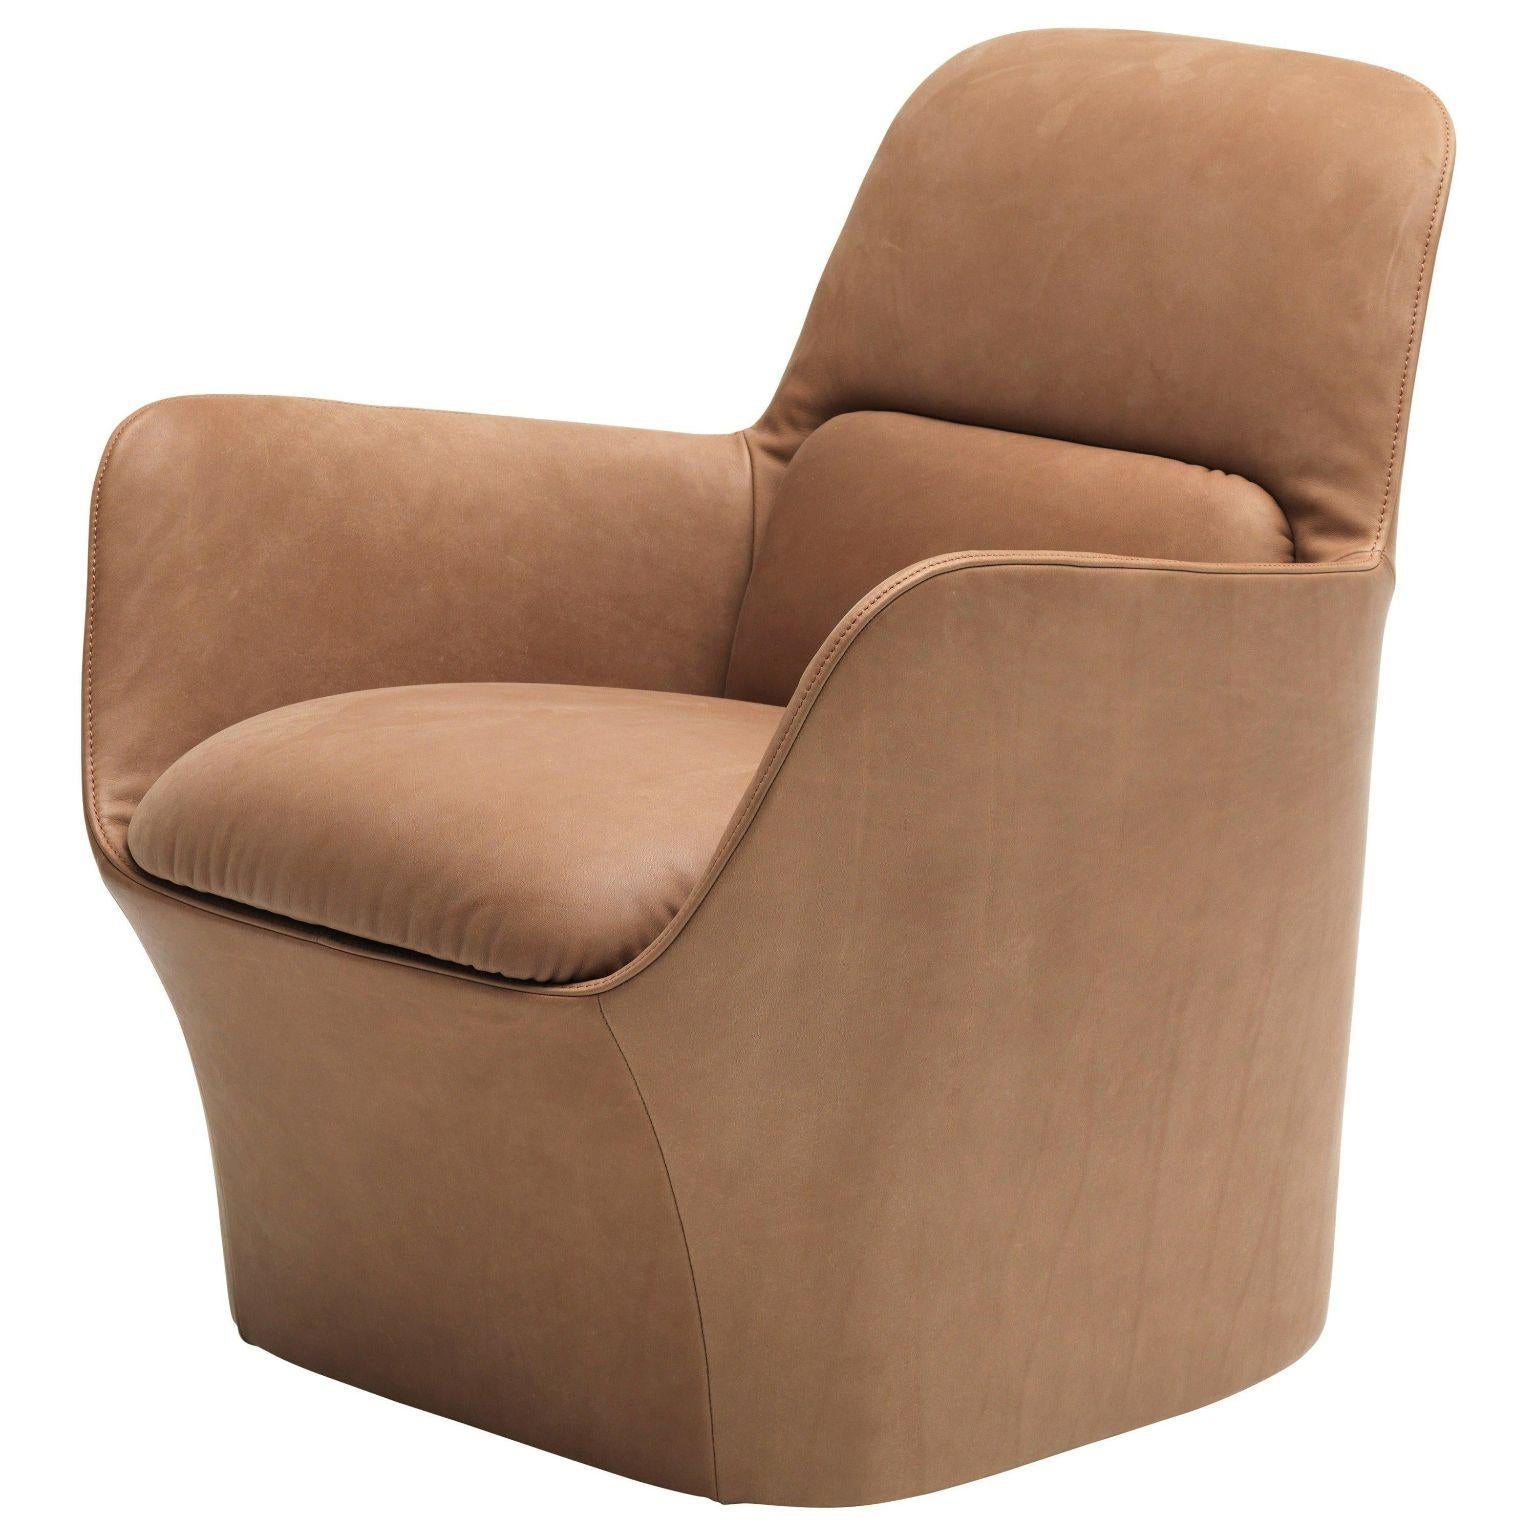 DS-110/101 armchair by De Sede.

Technical details:
Standard configuration: Thread color according to the color of the body. For further versions, please inquire. If not specified otherwise, the standard configuration will be